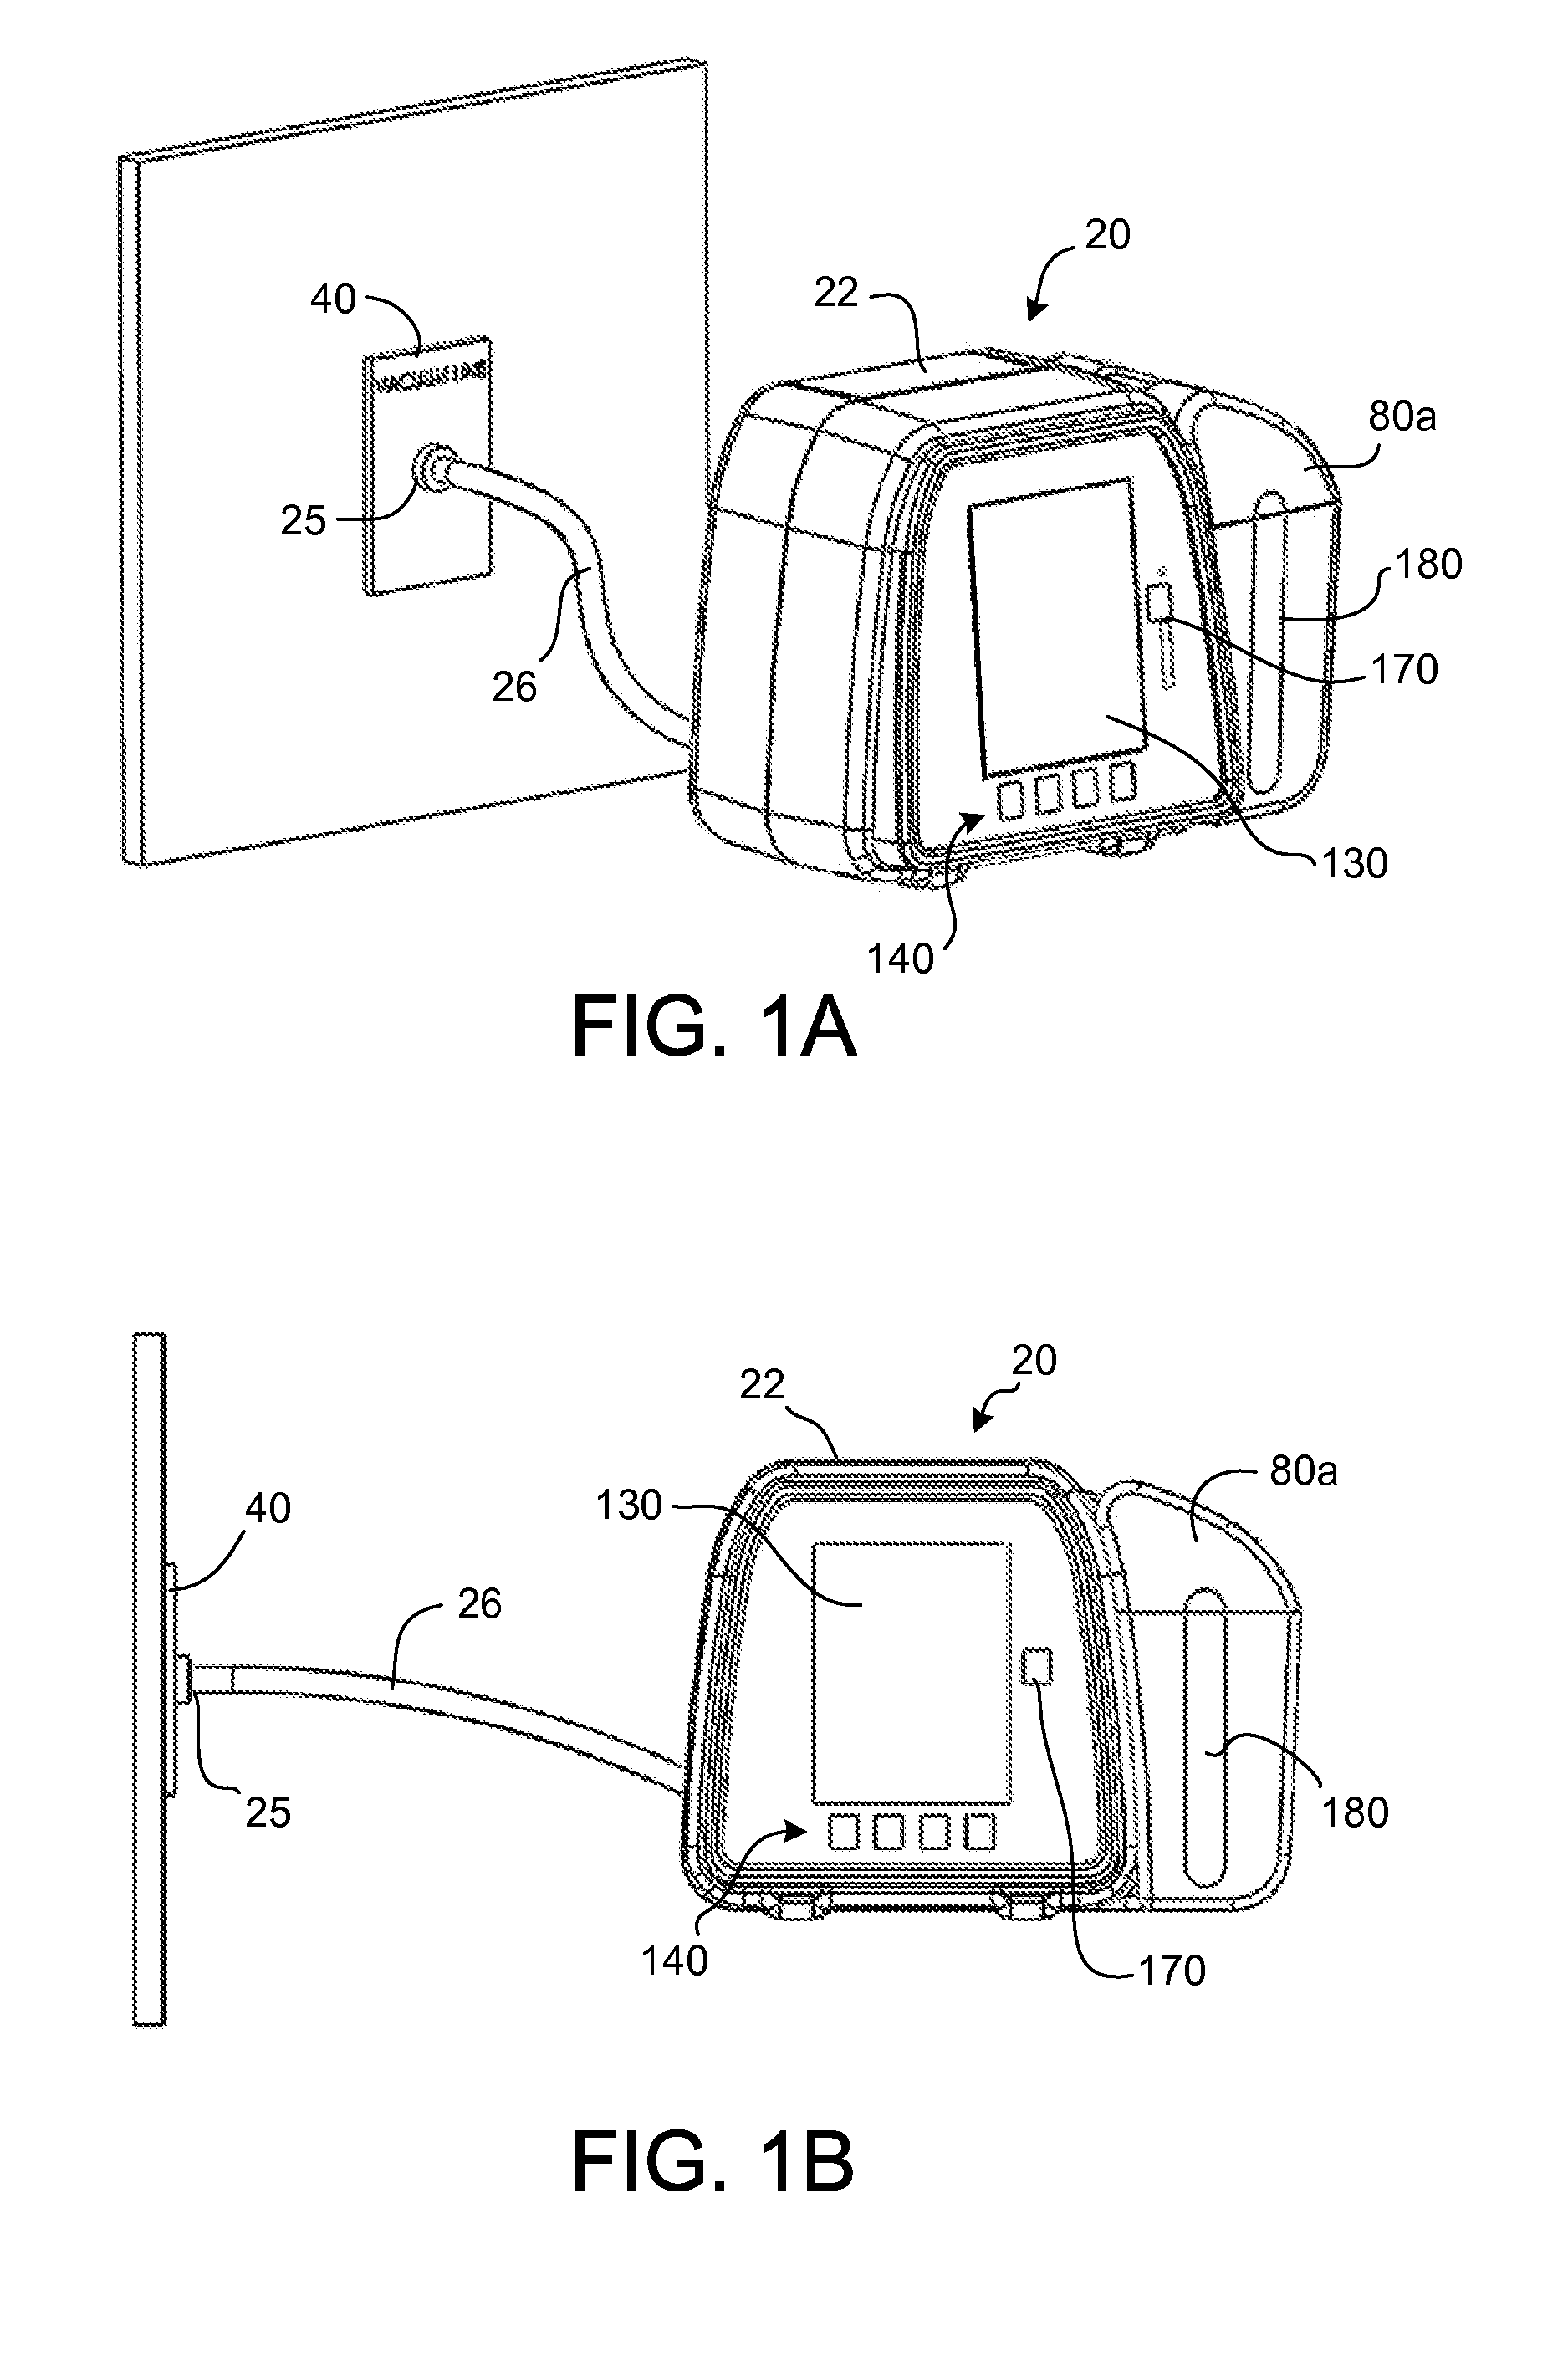 Wound treatment system and suction regulator for use therewith